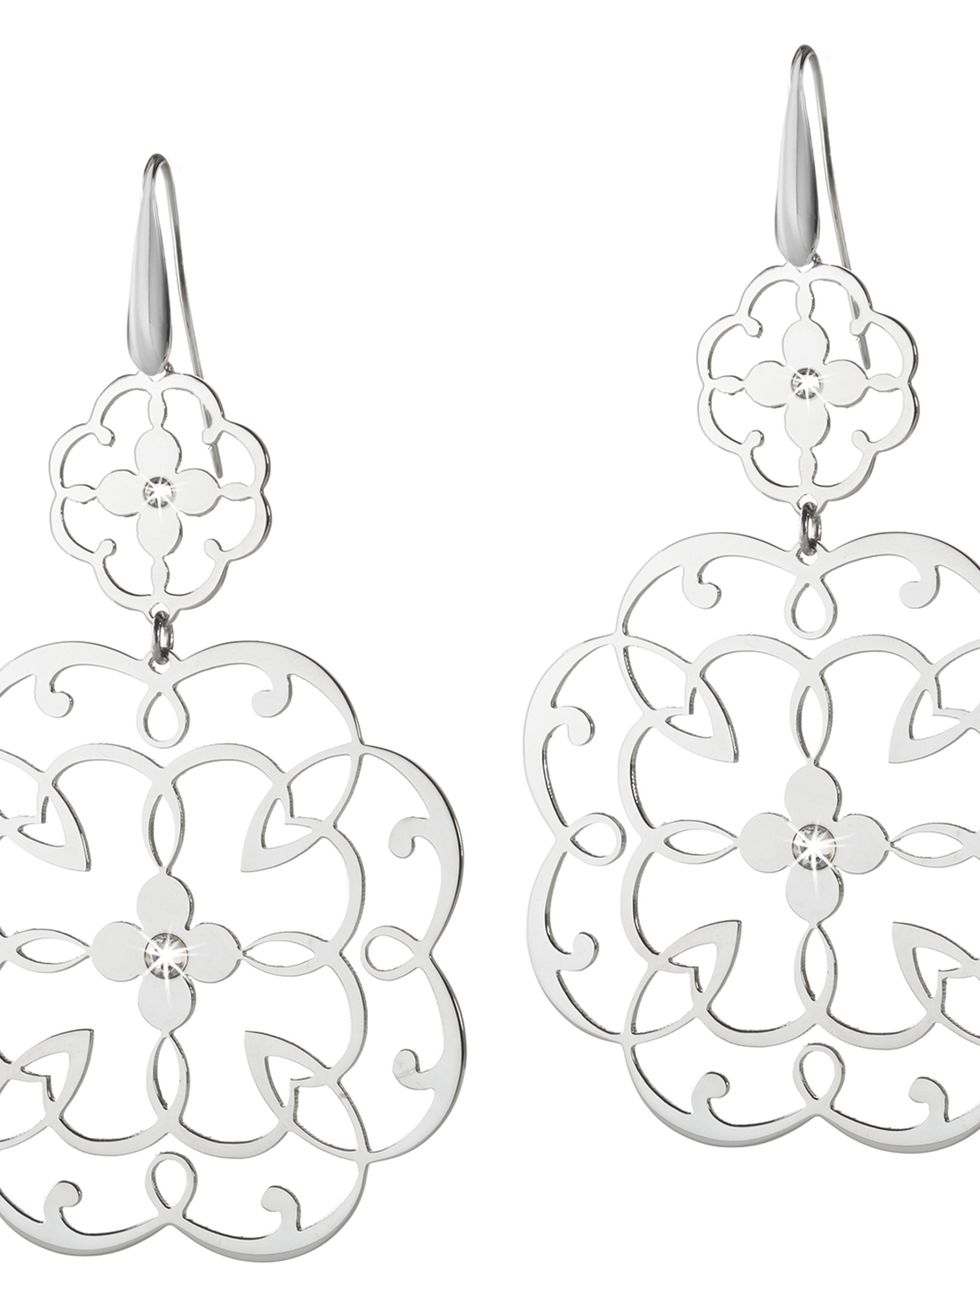 White, Pattern, Art, Line art, Black-and-white, Design, Circle, Silver, Earrings, Natural material, 